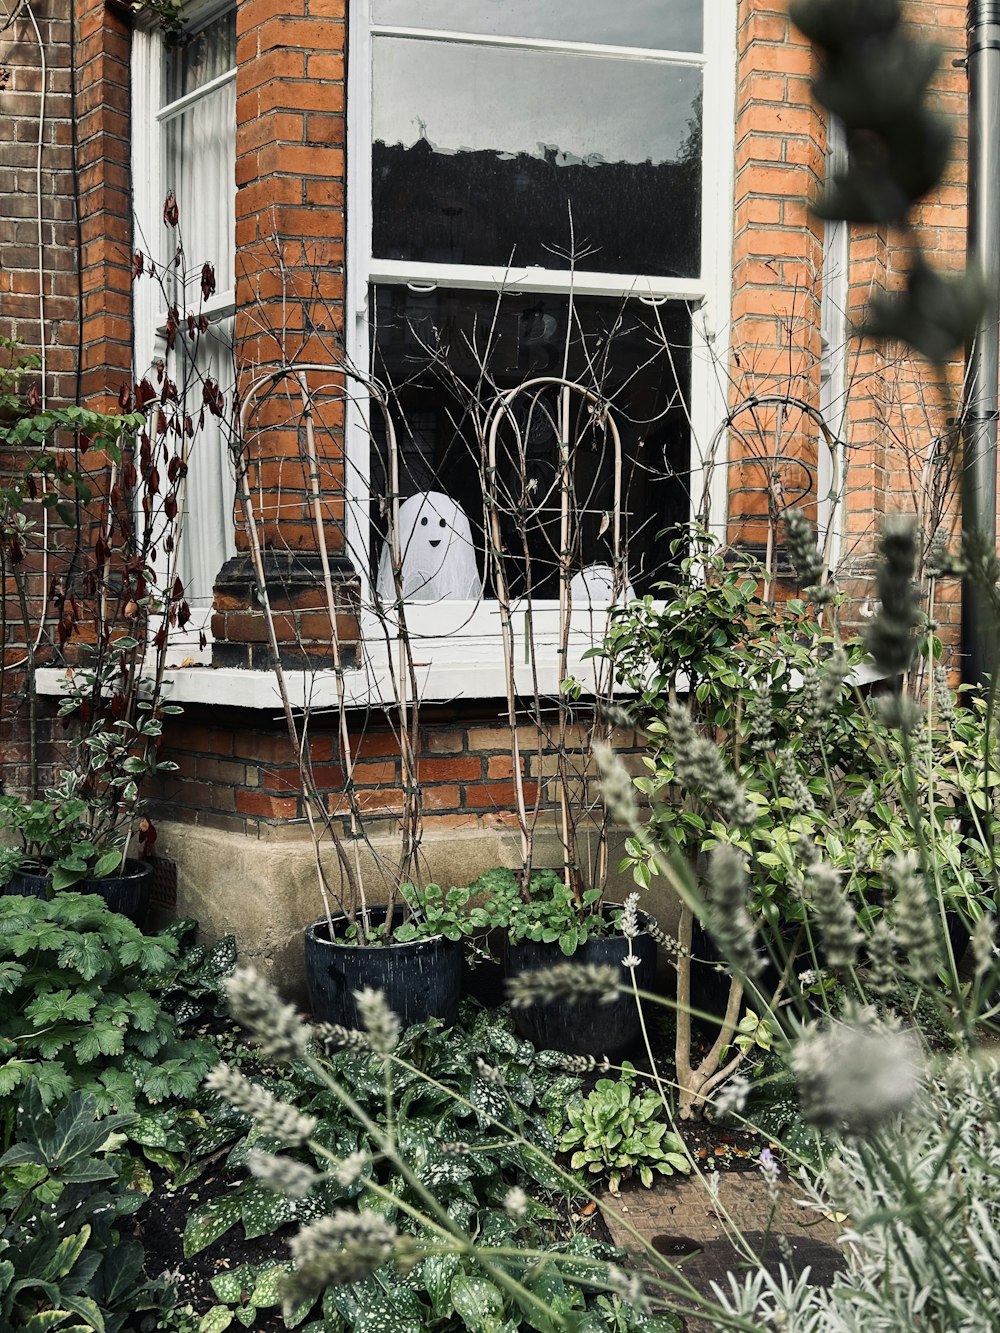 a white ghost sitting in a window sill surrounded by plants